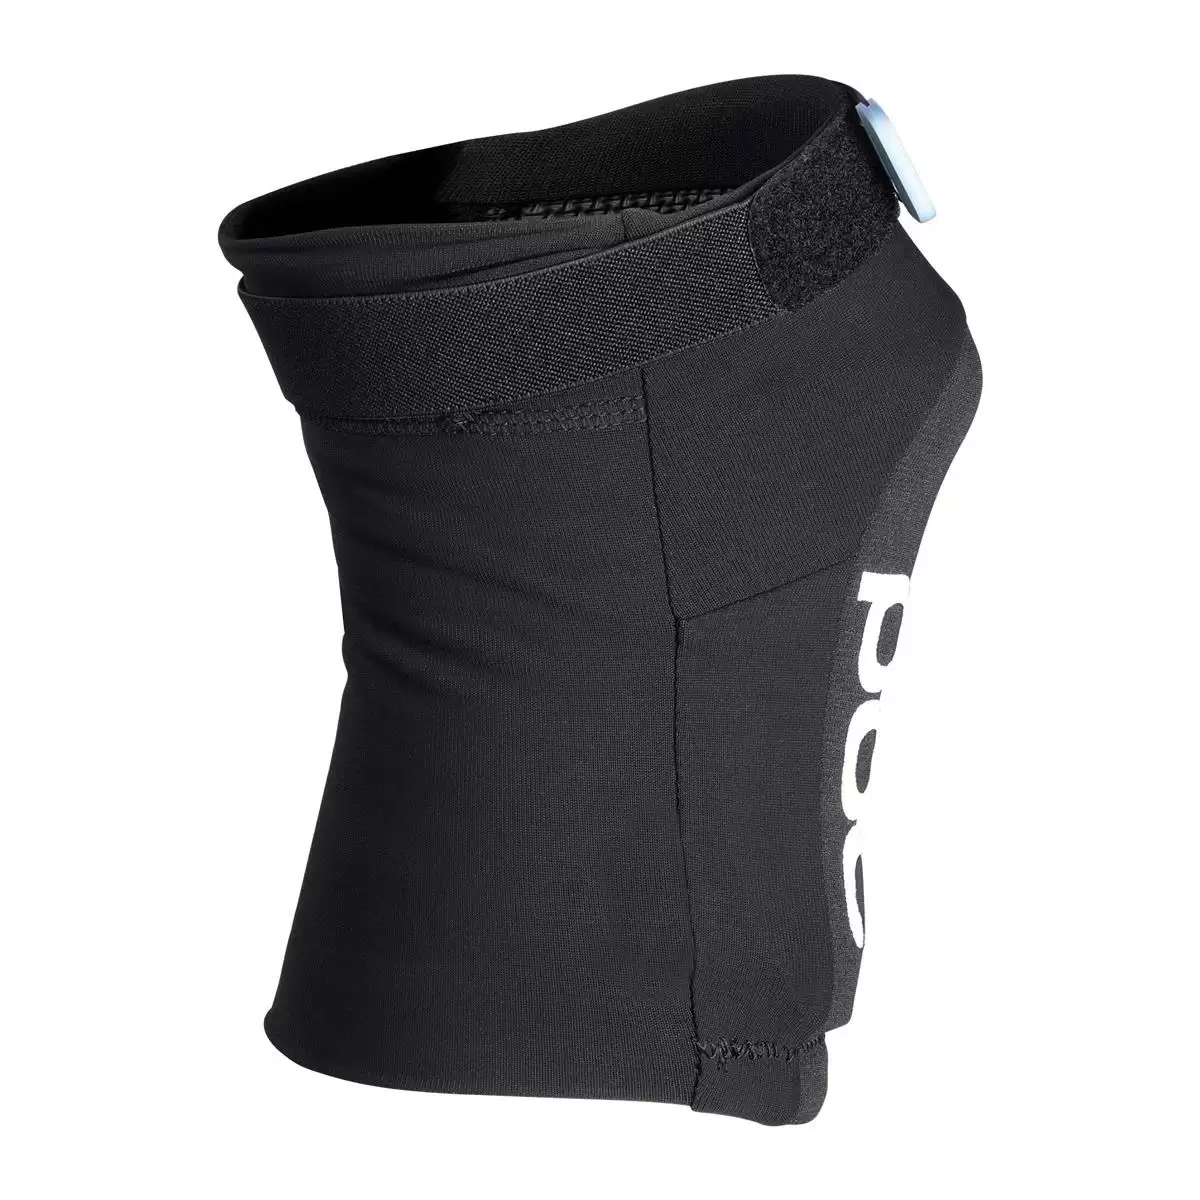 Joint VPD Air Knee pads black Size XS #2